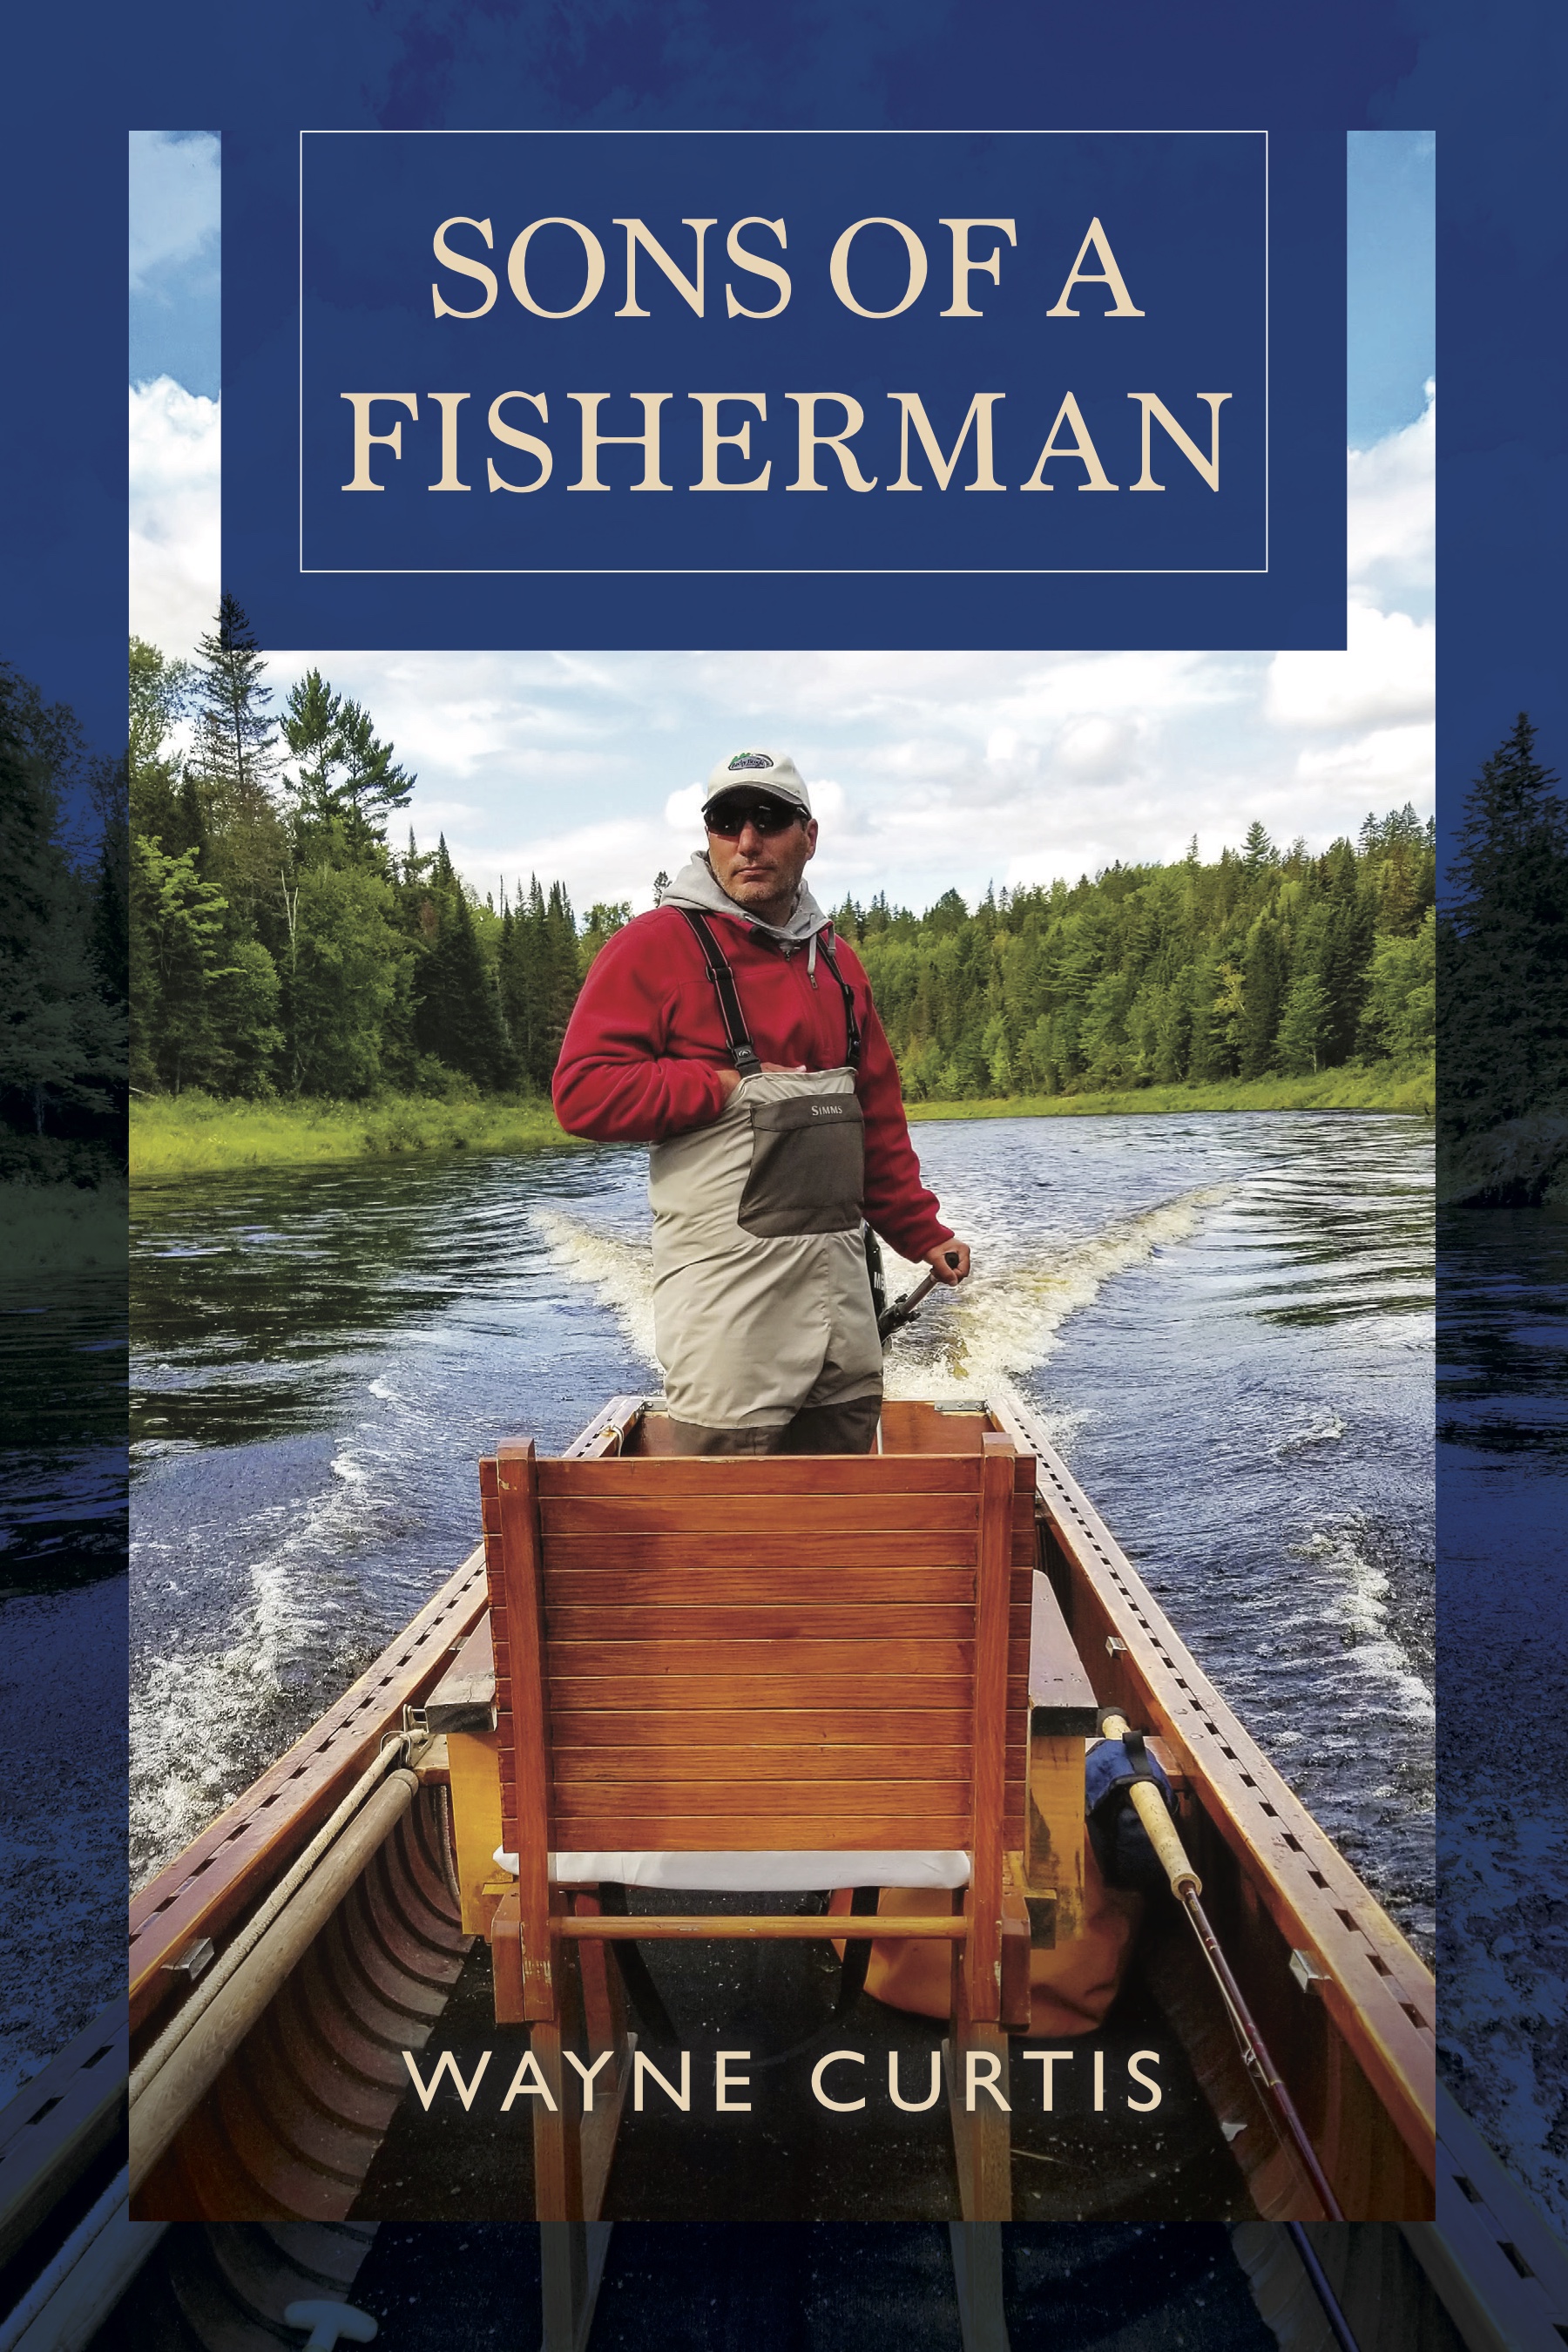 Sons of a Fisherman by Wayne Curtis (CA), Pottersfield Press